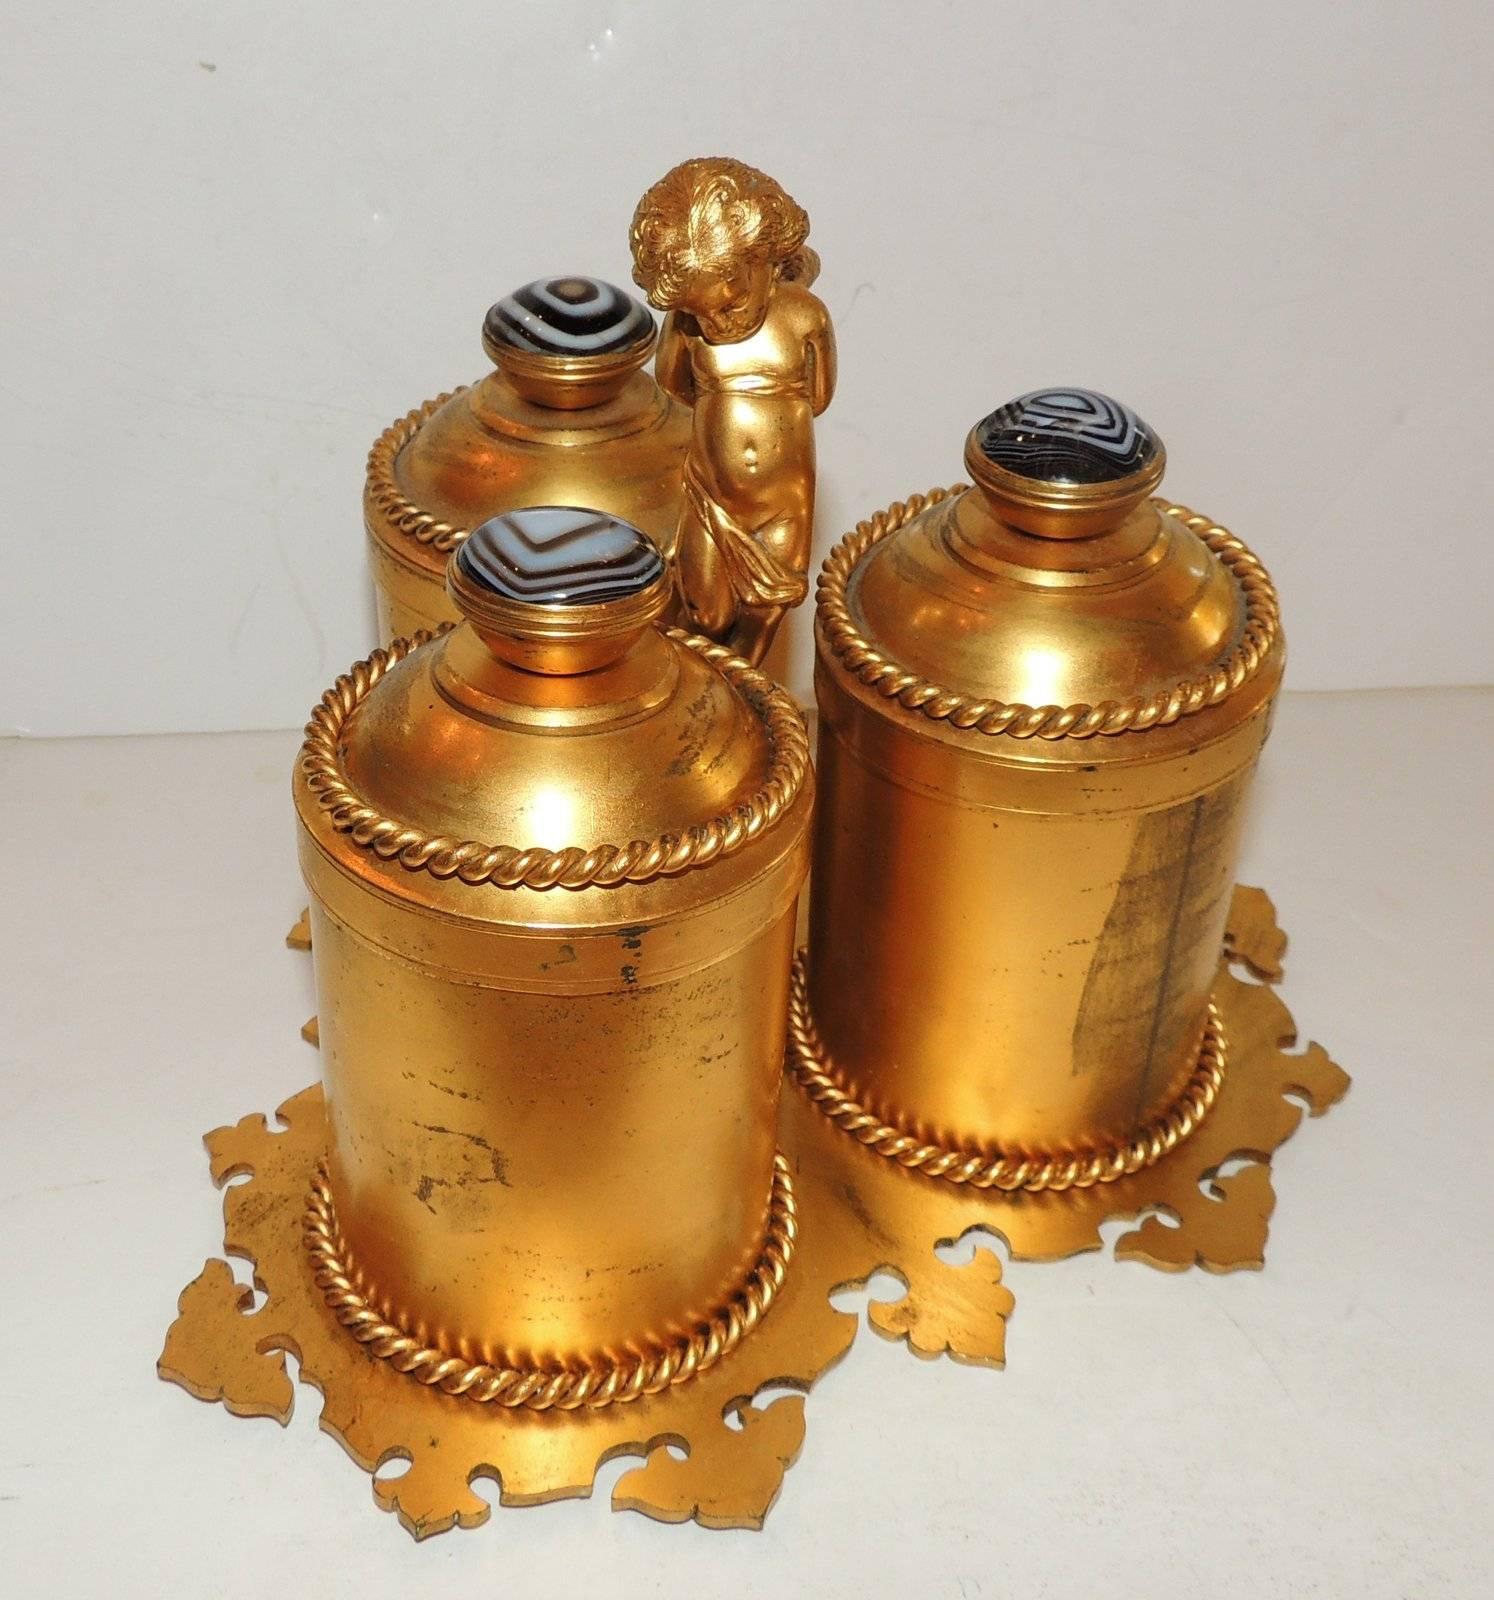 Beautiful Agates decorate the tops of this unusual vanity perfume set. Each of the three perfume holders is decorated with rope trim as are the tops. The interior of the bronze tops are lined with purple velvet as is the bottom. Each of the lovely